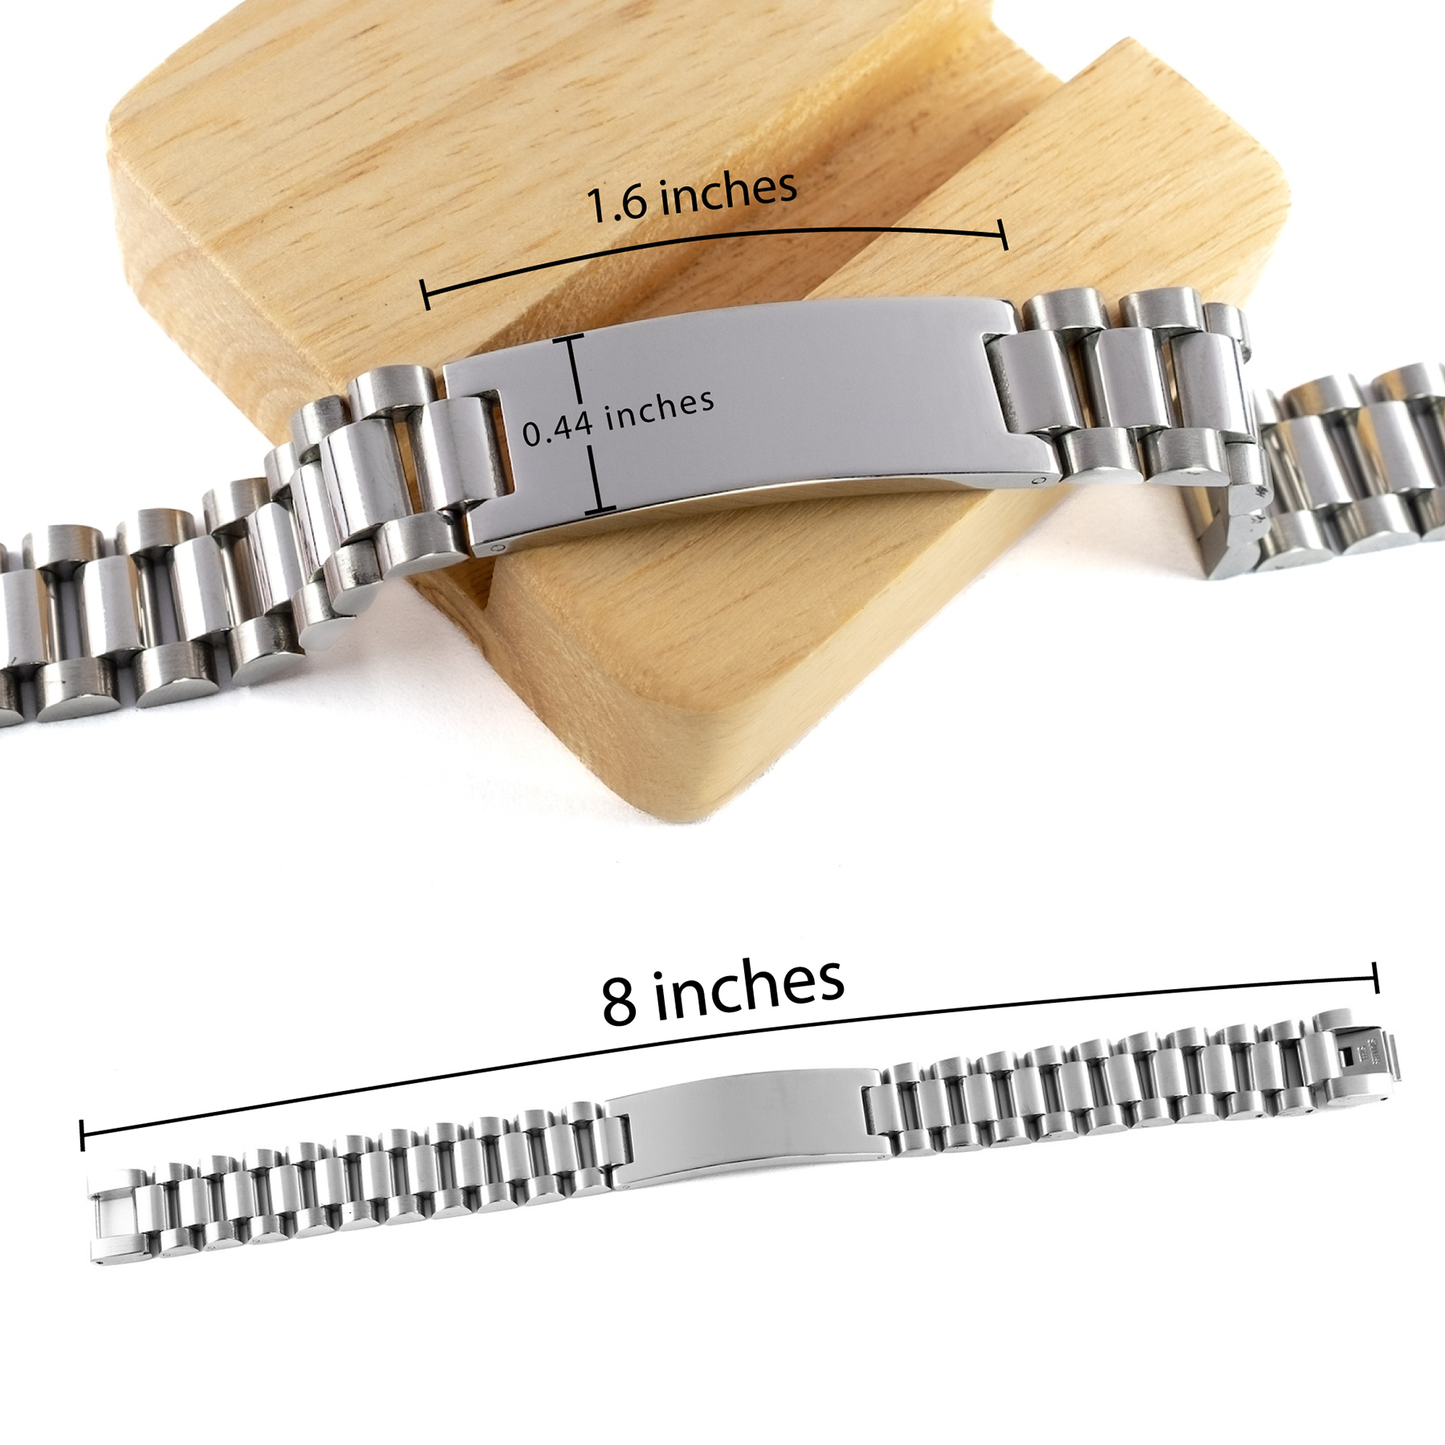 Stainless Steel Ladder Bracelet Nephew - Perfect love casts out fear - Inspirational Gift for Birthday, Graduation, Christmas - Stainless Steel Bracelet for Nephew